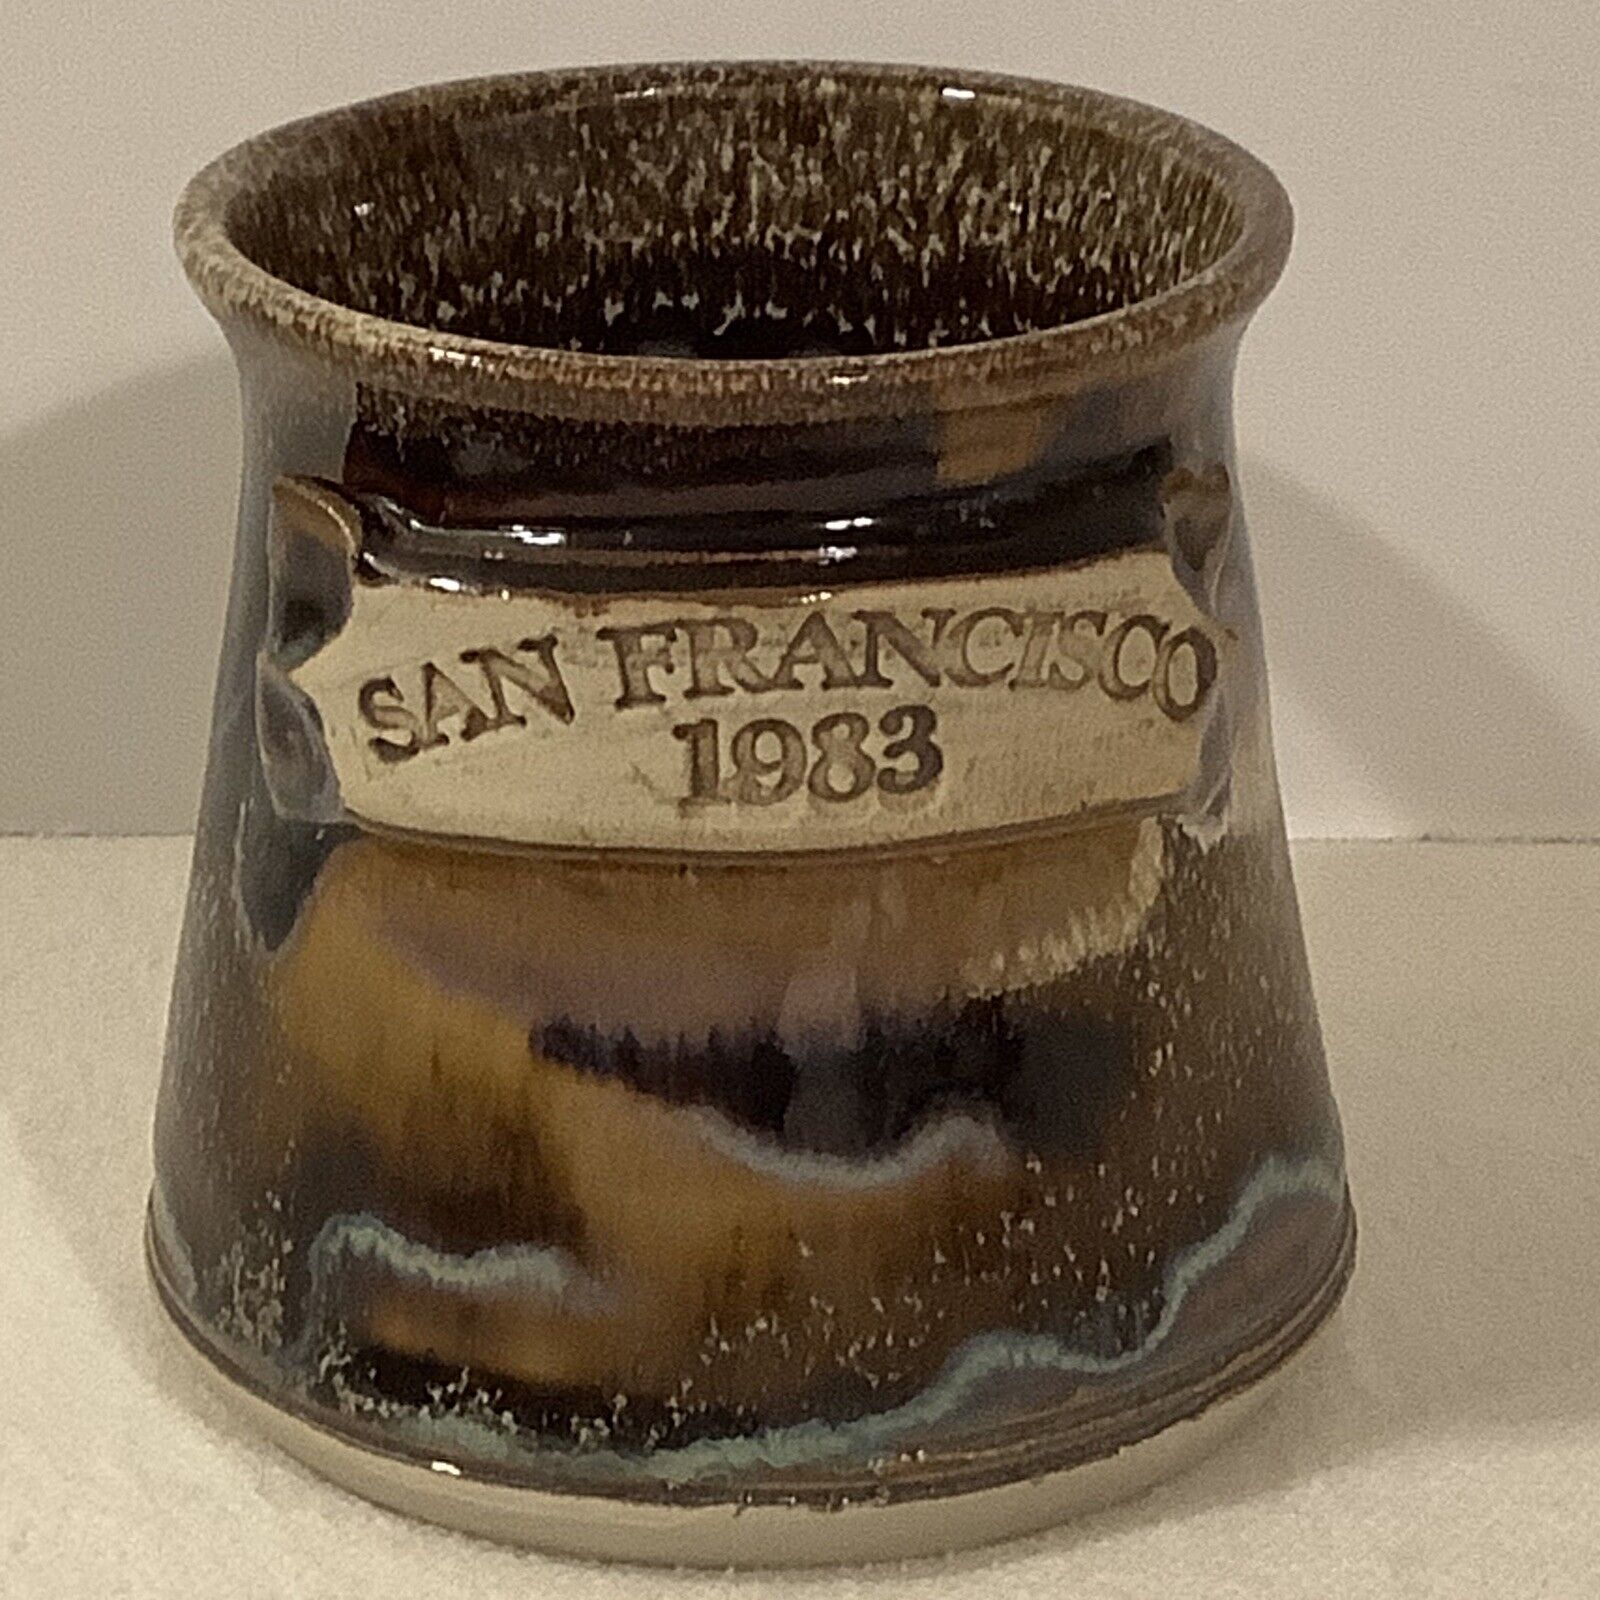 Vint.Hand Thrown In California Mud In Your Eye Pottery SanFrancisco 1983 Cup Mug